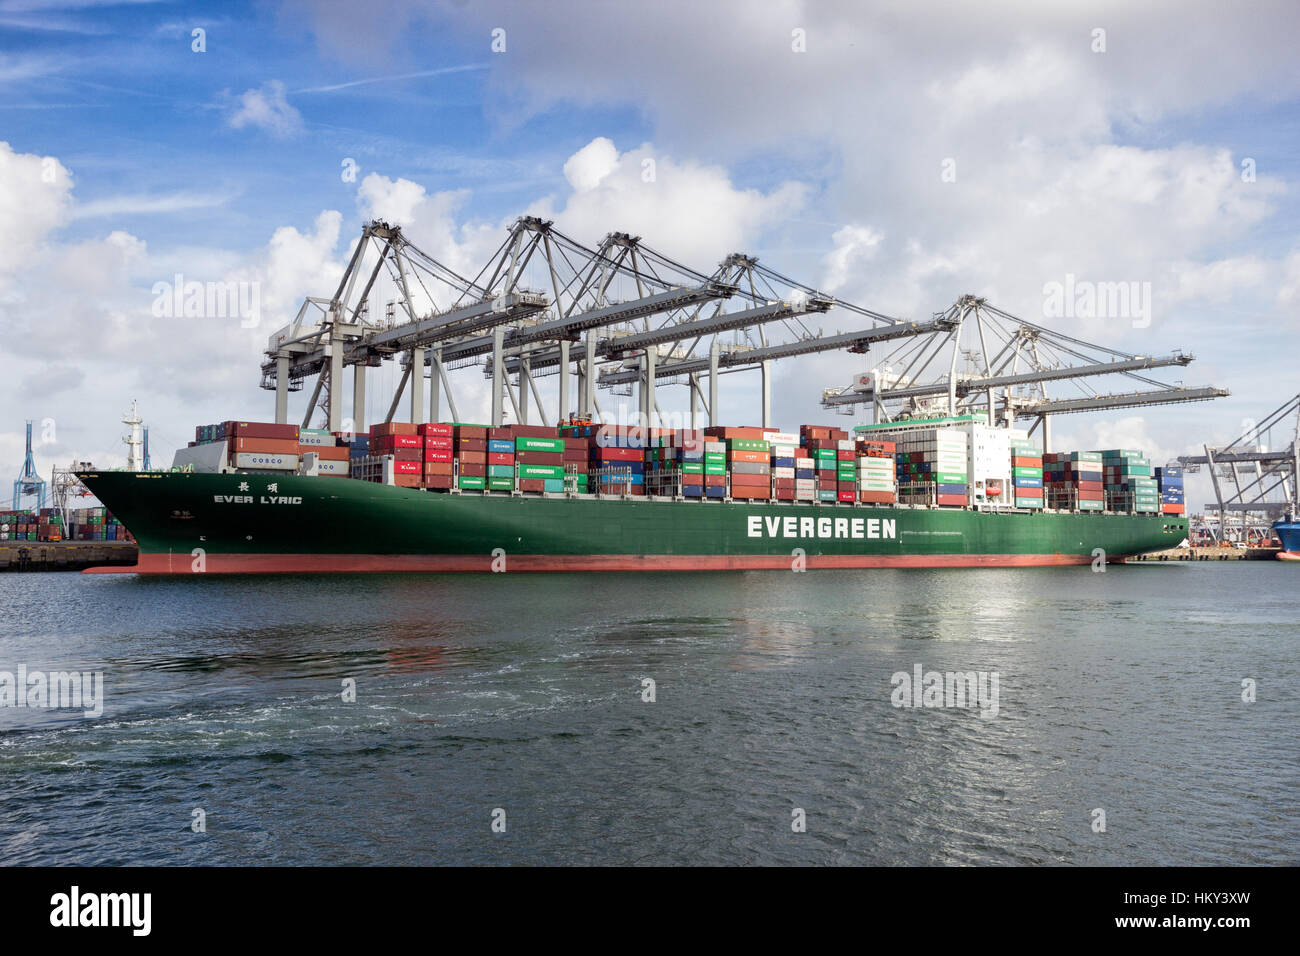 ROTTERDAM, NETHERLANDS - MAR 16, 2016: Container ship Ever Lyric from Evergreen moored at the ECT container terminal in the Port of Rotterdam. Stock Photo